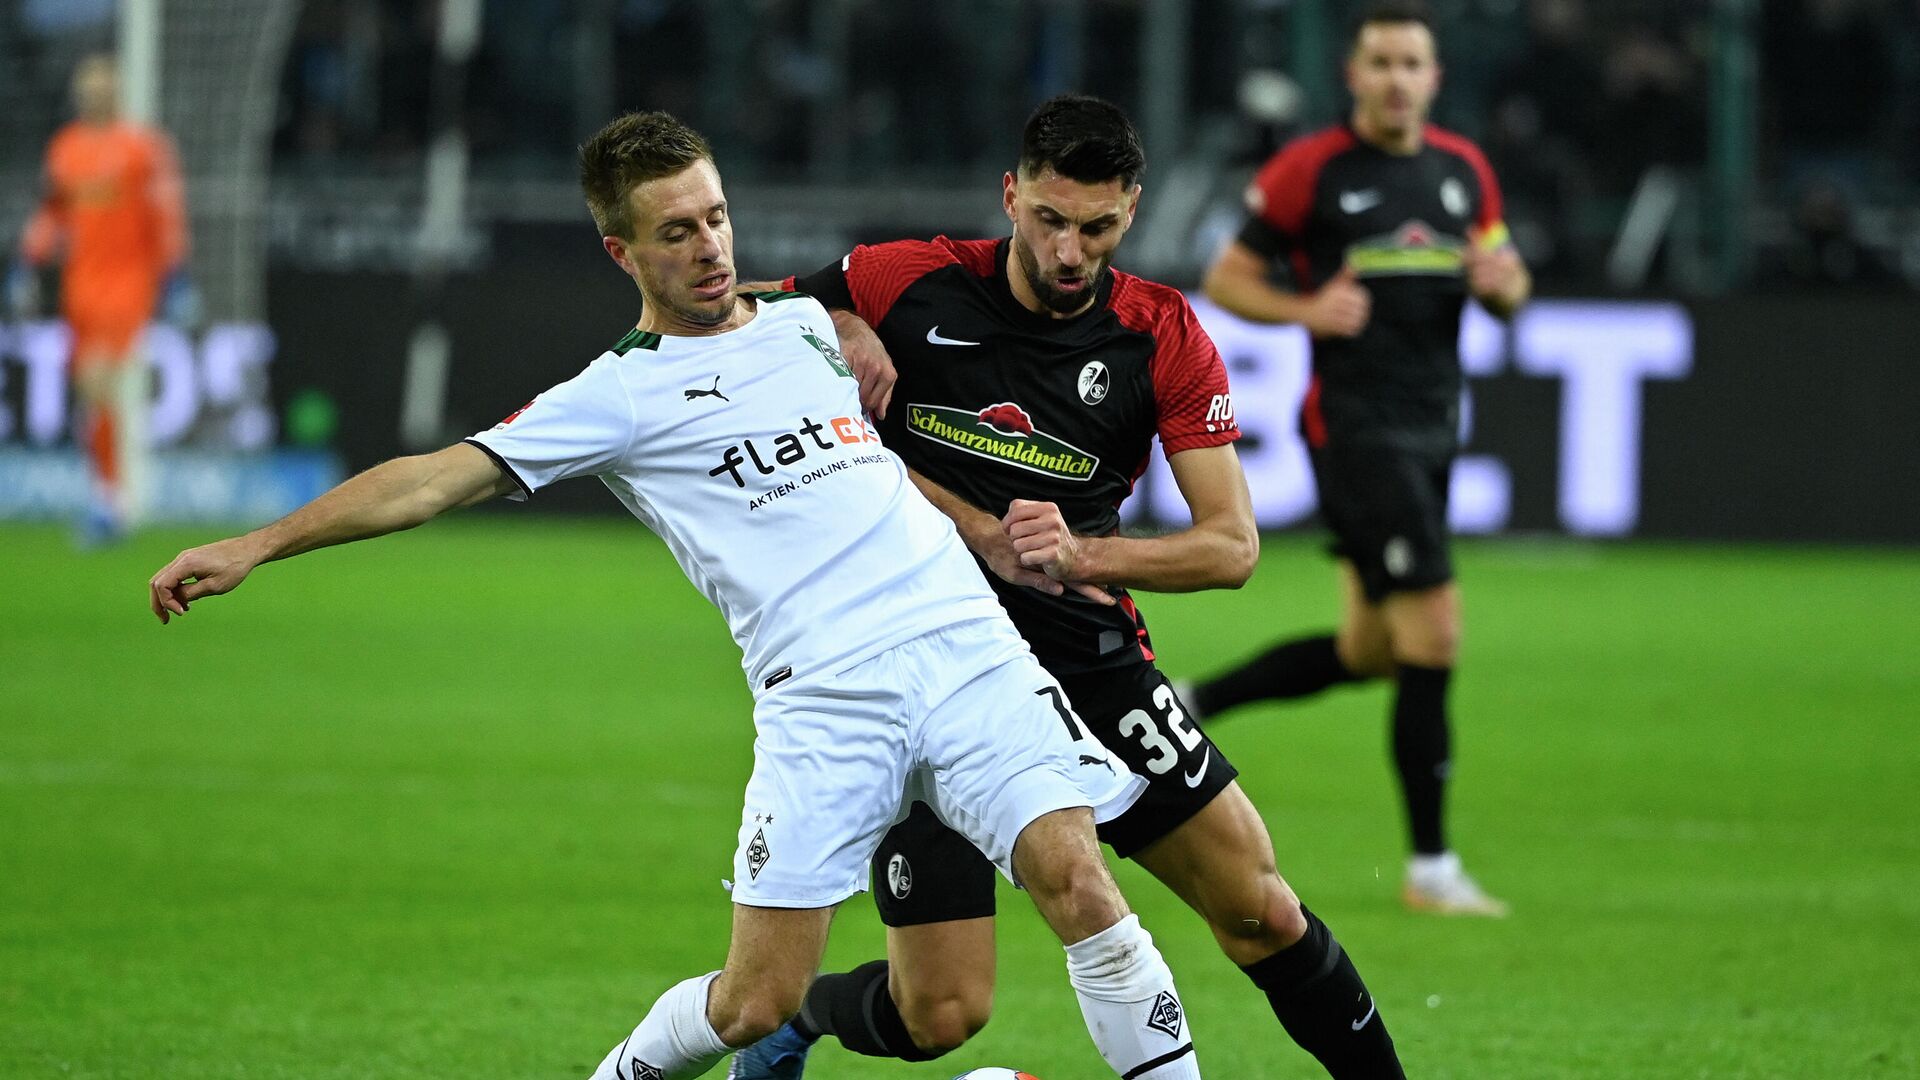 Moenchengladbach's German forward Patrick Herrmann (L) and Freiburg's Italian midfielder Vincenzo Grifo vie for the ball during the German first division Bundesliga football match Borussia Moenchengladbach v SC Freiburg in Moenchengladbach, western Germany, on December 5, 2021. (Photo by Ina Fassbender / AFP) / DFL REGULATIONS PROHIBIT ANY USE OF PHOTOGRAPHS AS IMAGE SEQUENCES AND/OR QUASI-VIDEO - РИА Новости, 1920, 05.12.2021